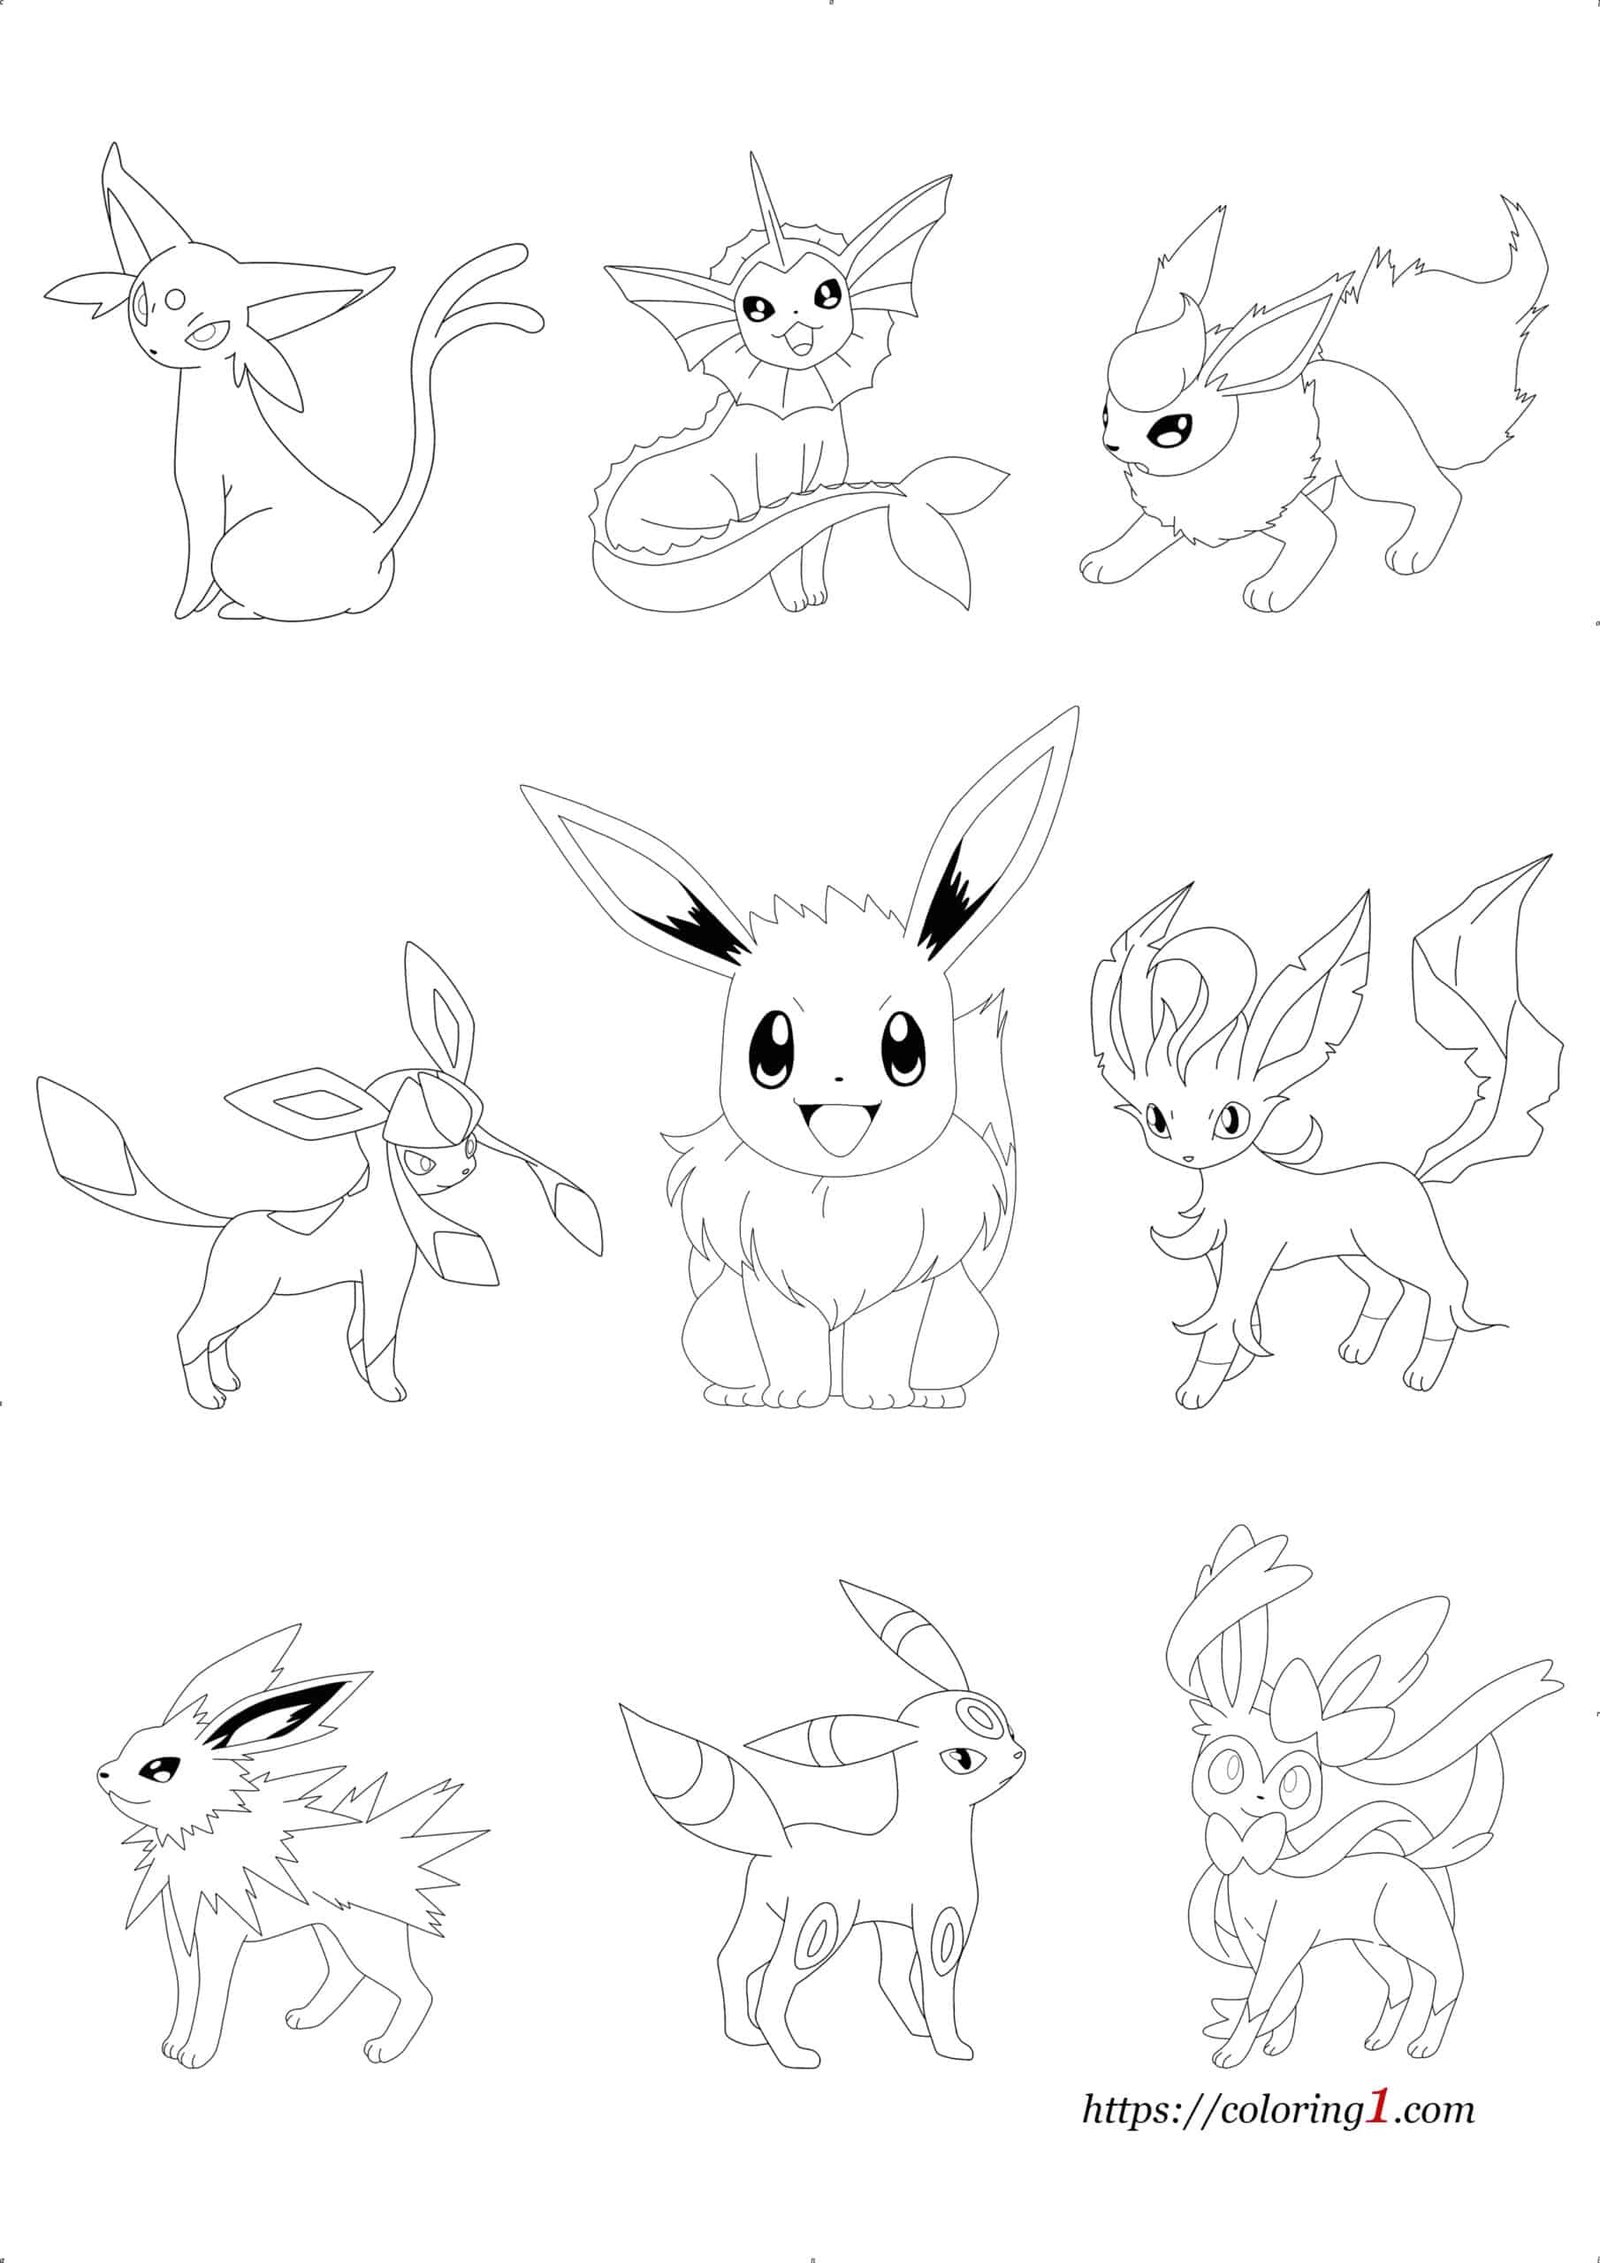 200 Eevee Coloring Pages: Evolve Your Art Skills 78